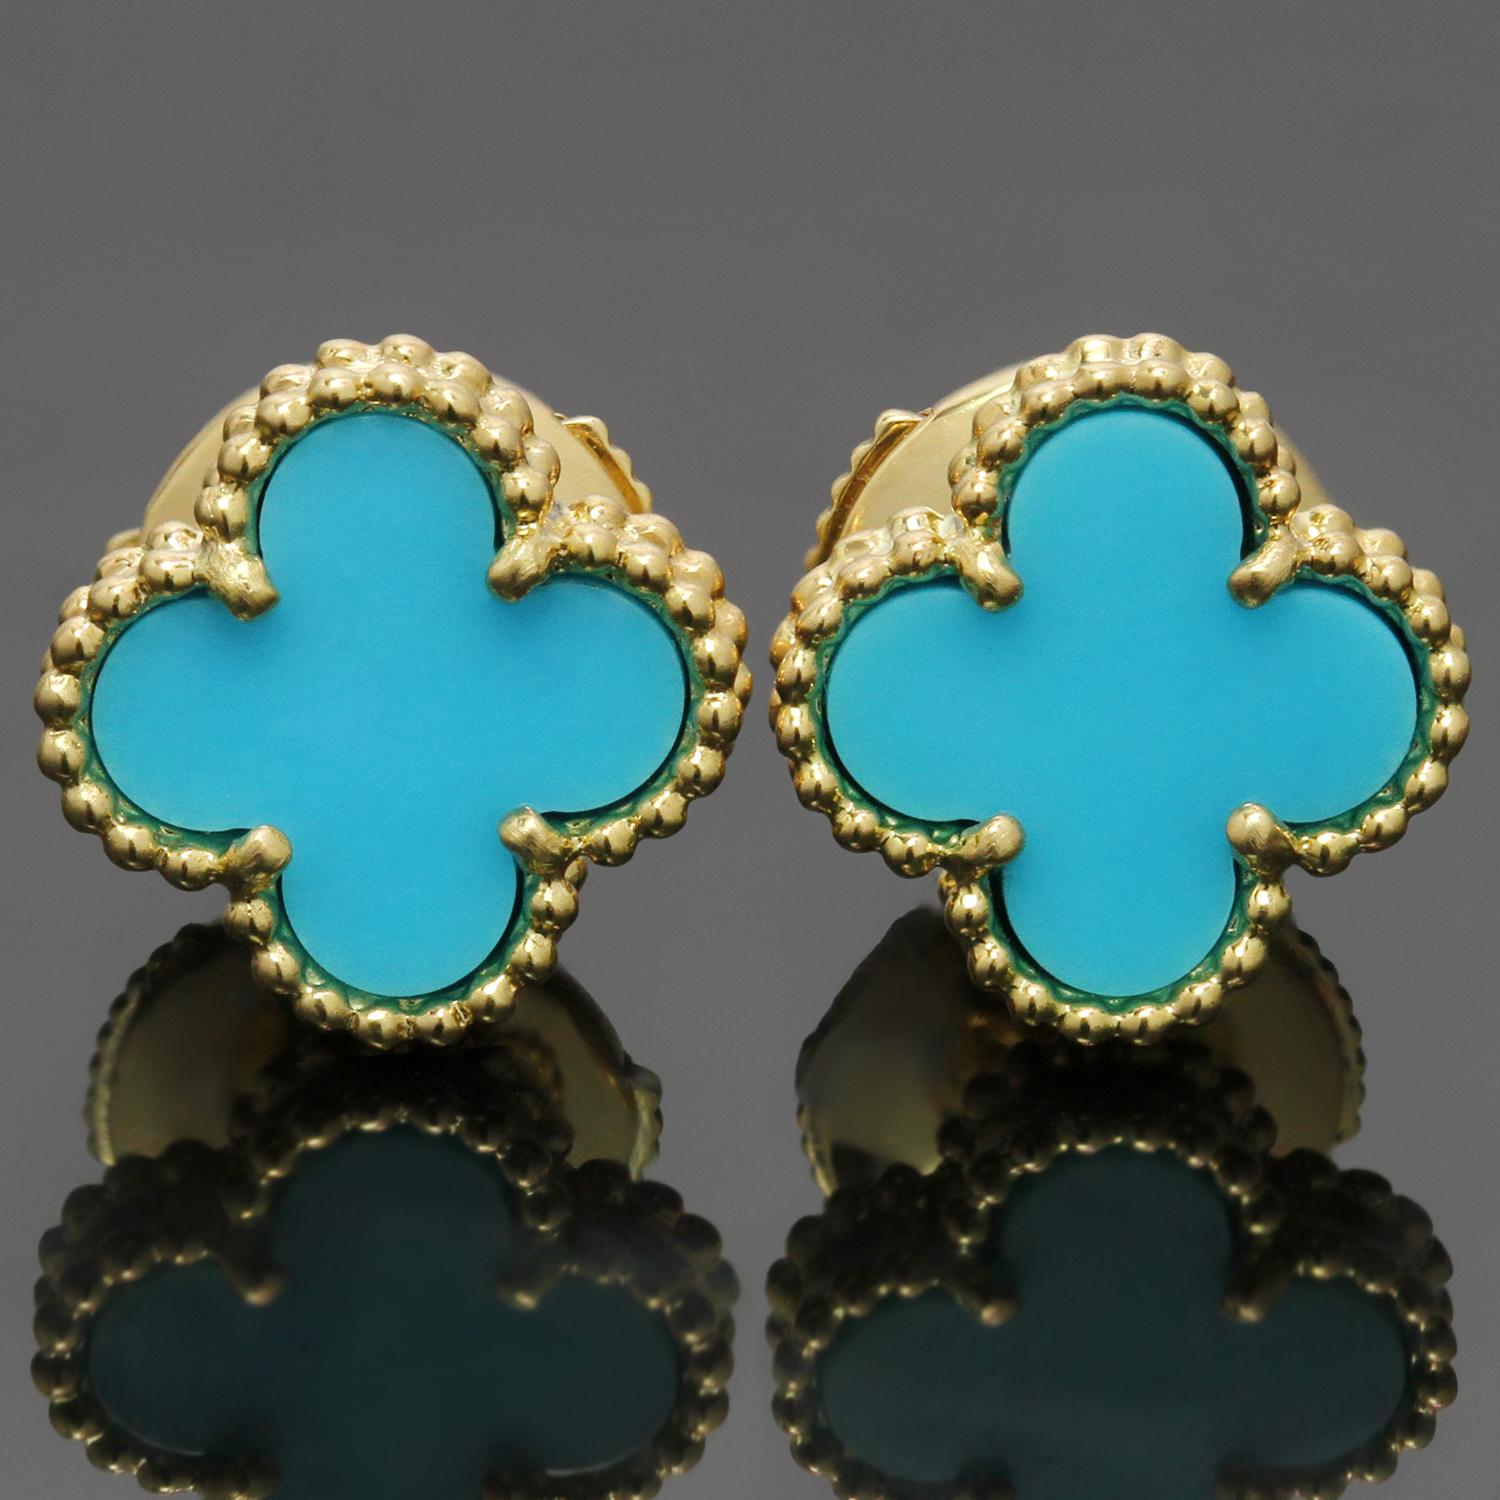 Women's Van Cleef & Arpels Sweet Alhambra Turquoise YG Earrings. VCA Pouch Papers